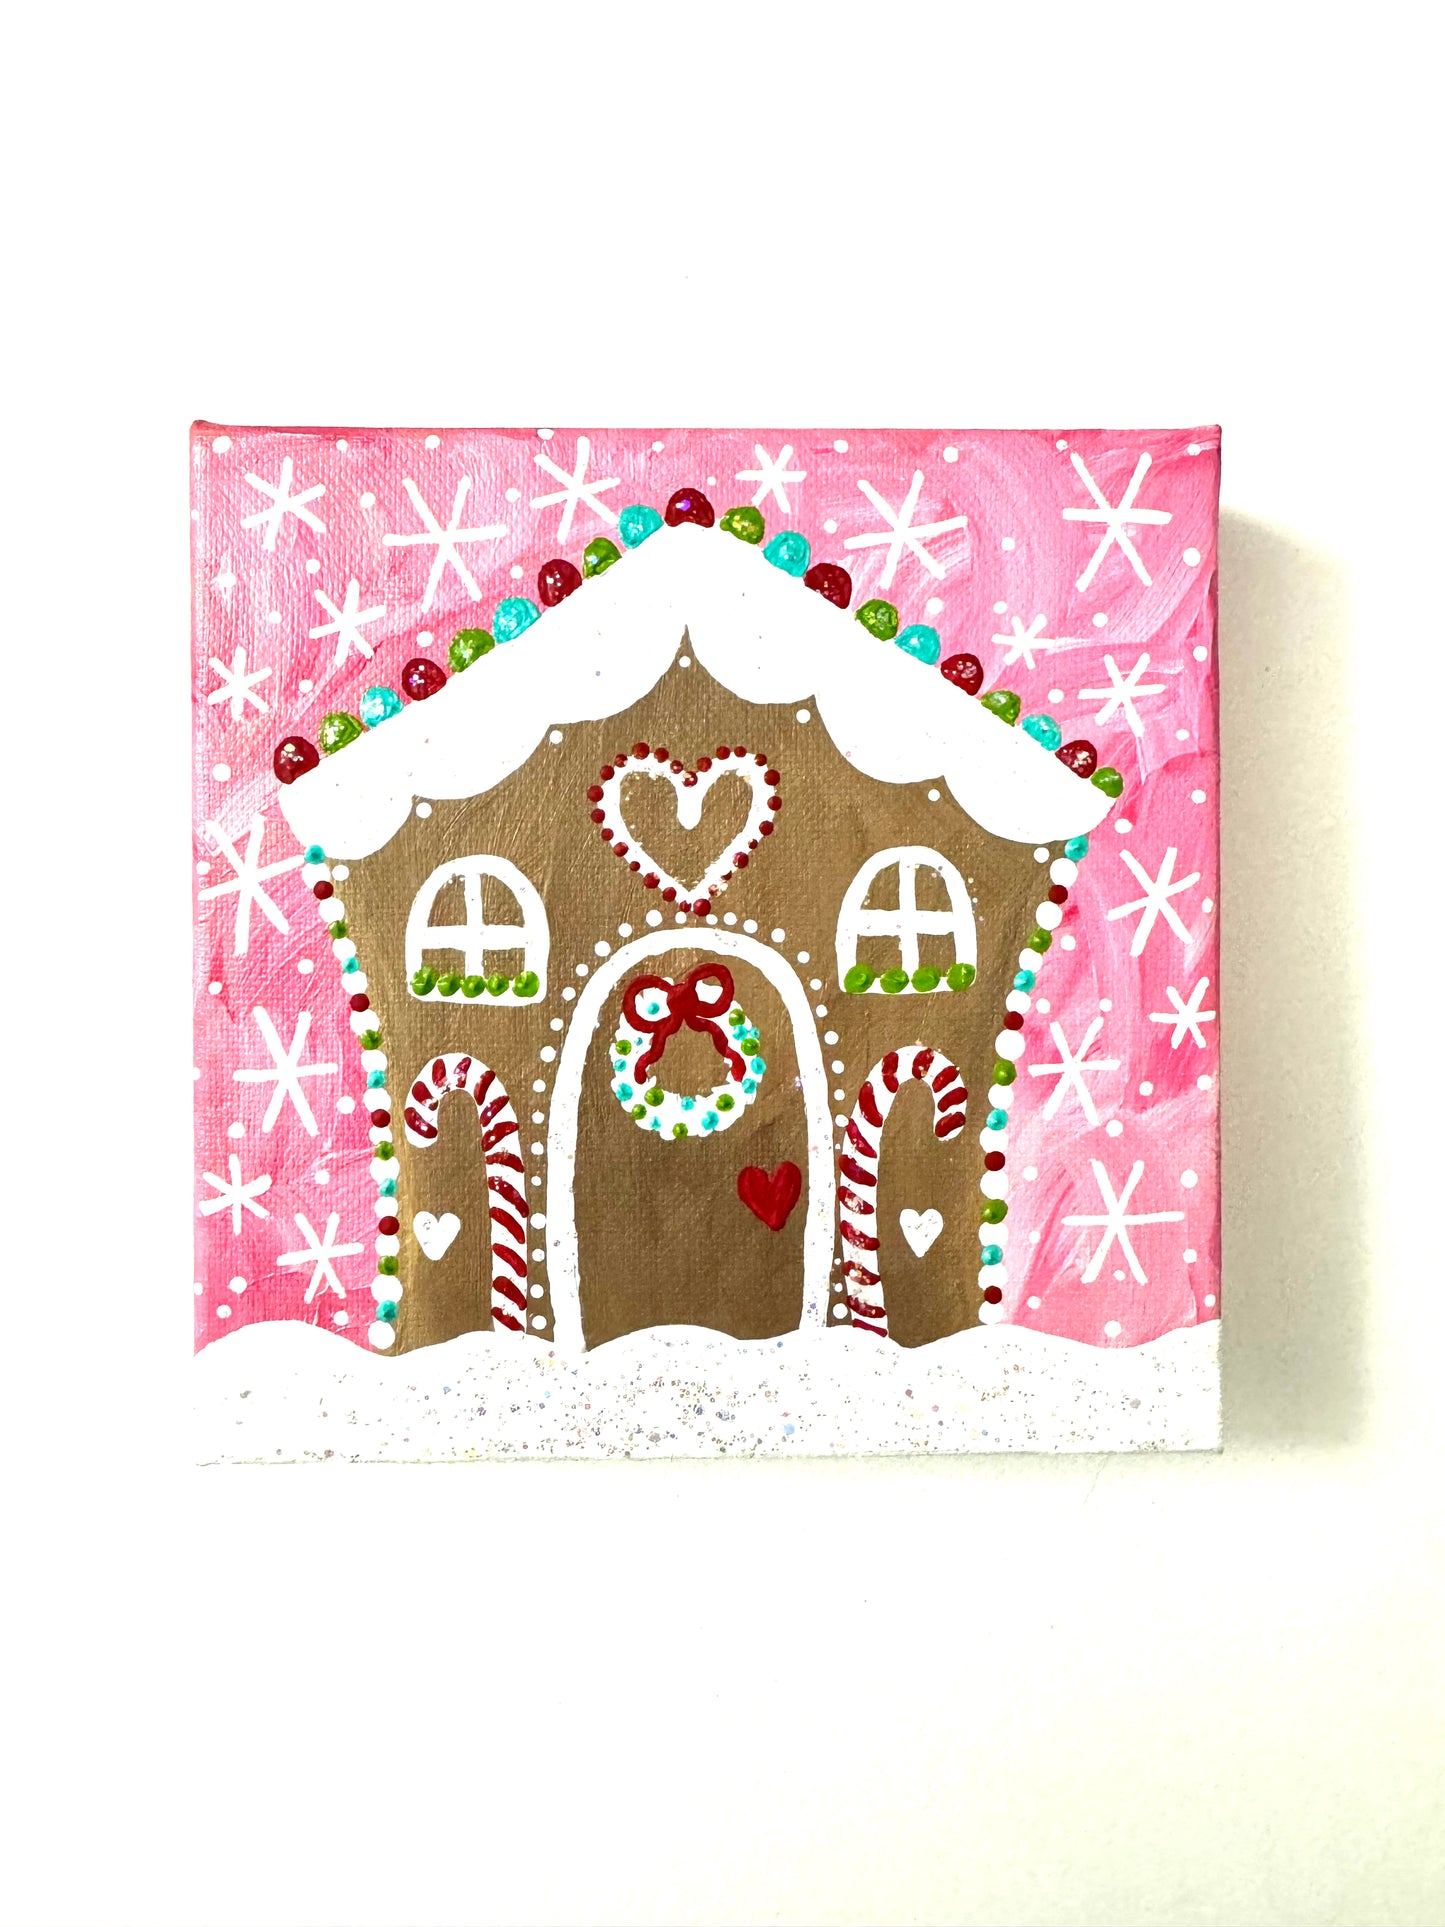 PRE-ORDER / Pink Gingerbread House 6x6 inch original painting on canvas